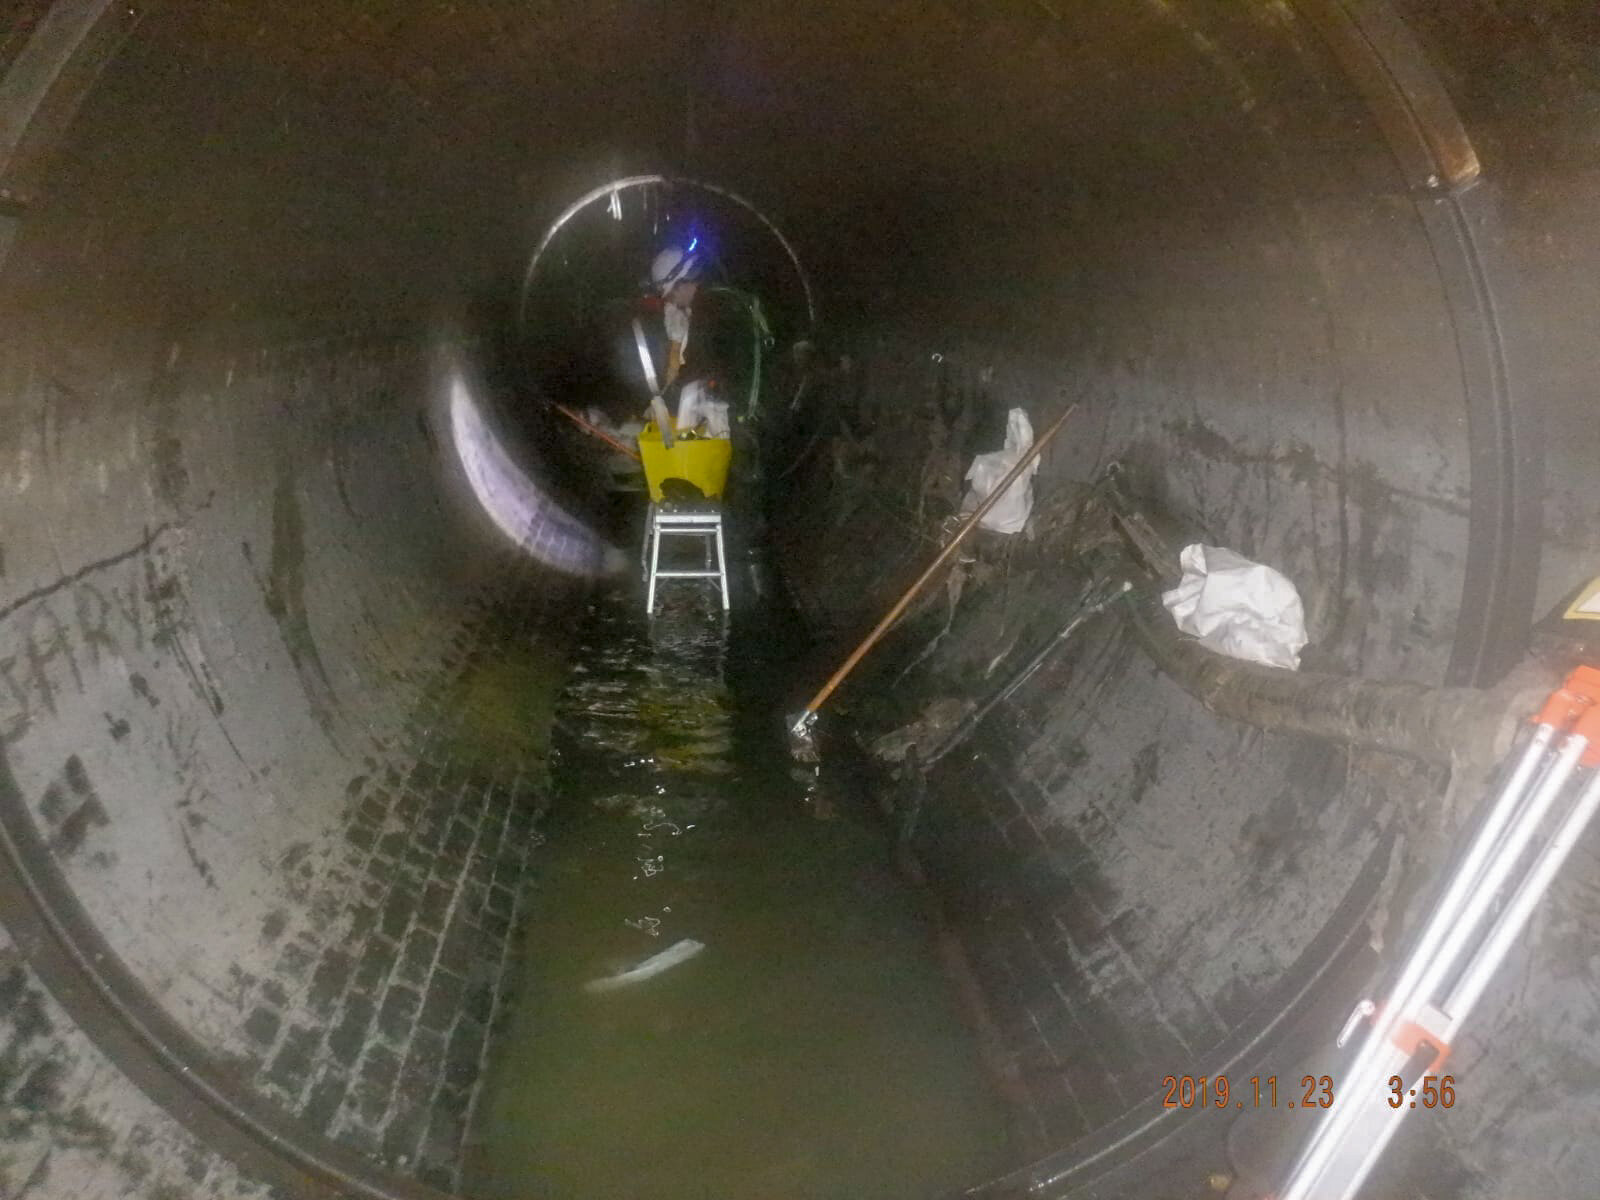  tunnel inspection, pipe inspection, tunnel survey, pipe survey, diving services, lidar, 3d scanning, Flume Installation, Flume Install, marine inspection services, water pipe inspection, underwater construction, mmp underwater, pipe inspection, inac